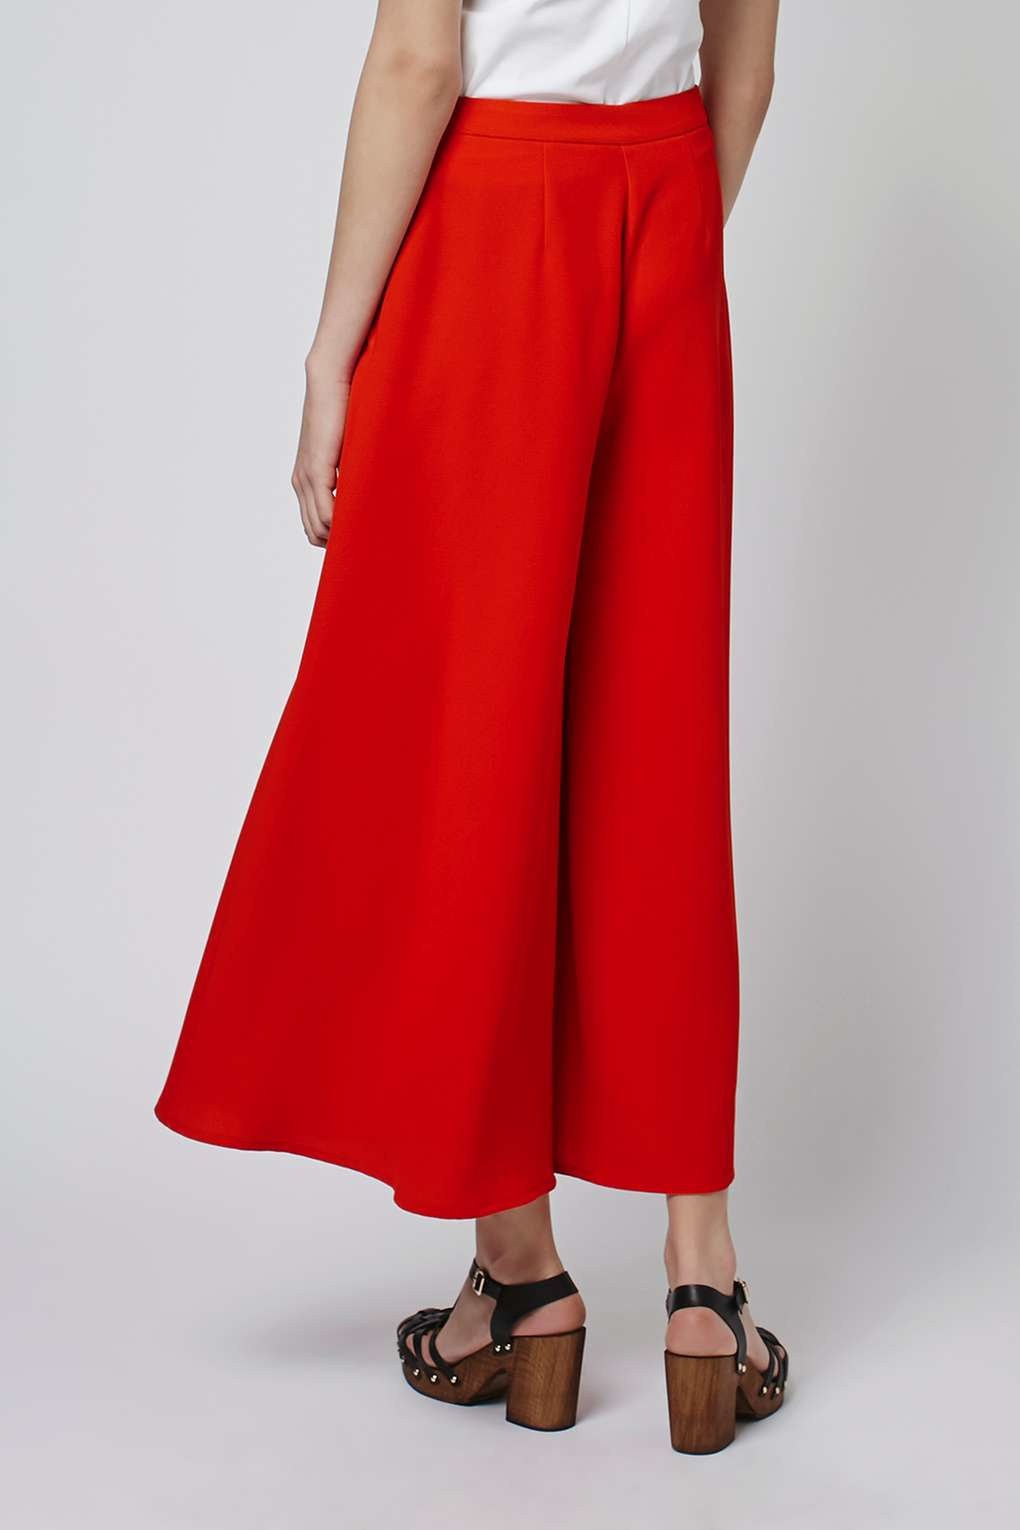 TOPSHOP Synthetic Wide Leg Palazzo Trousers in Red - Lyst